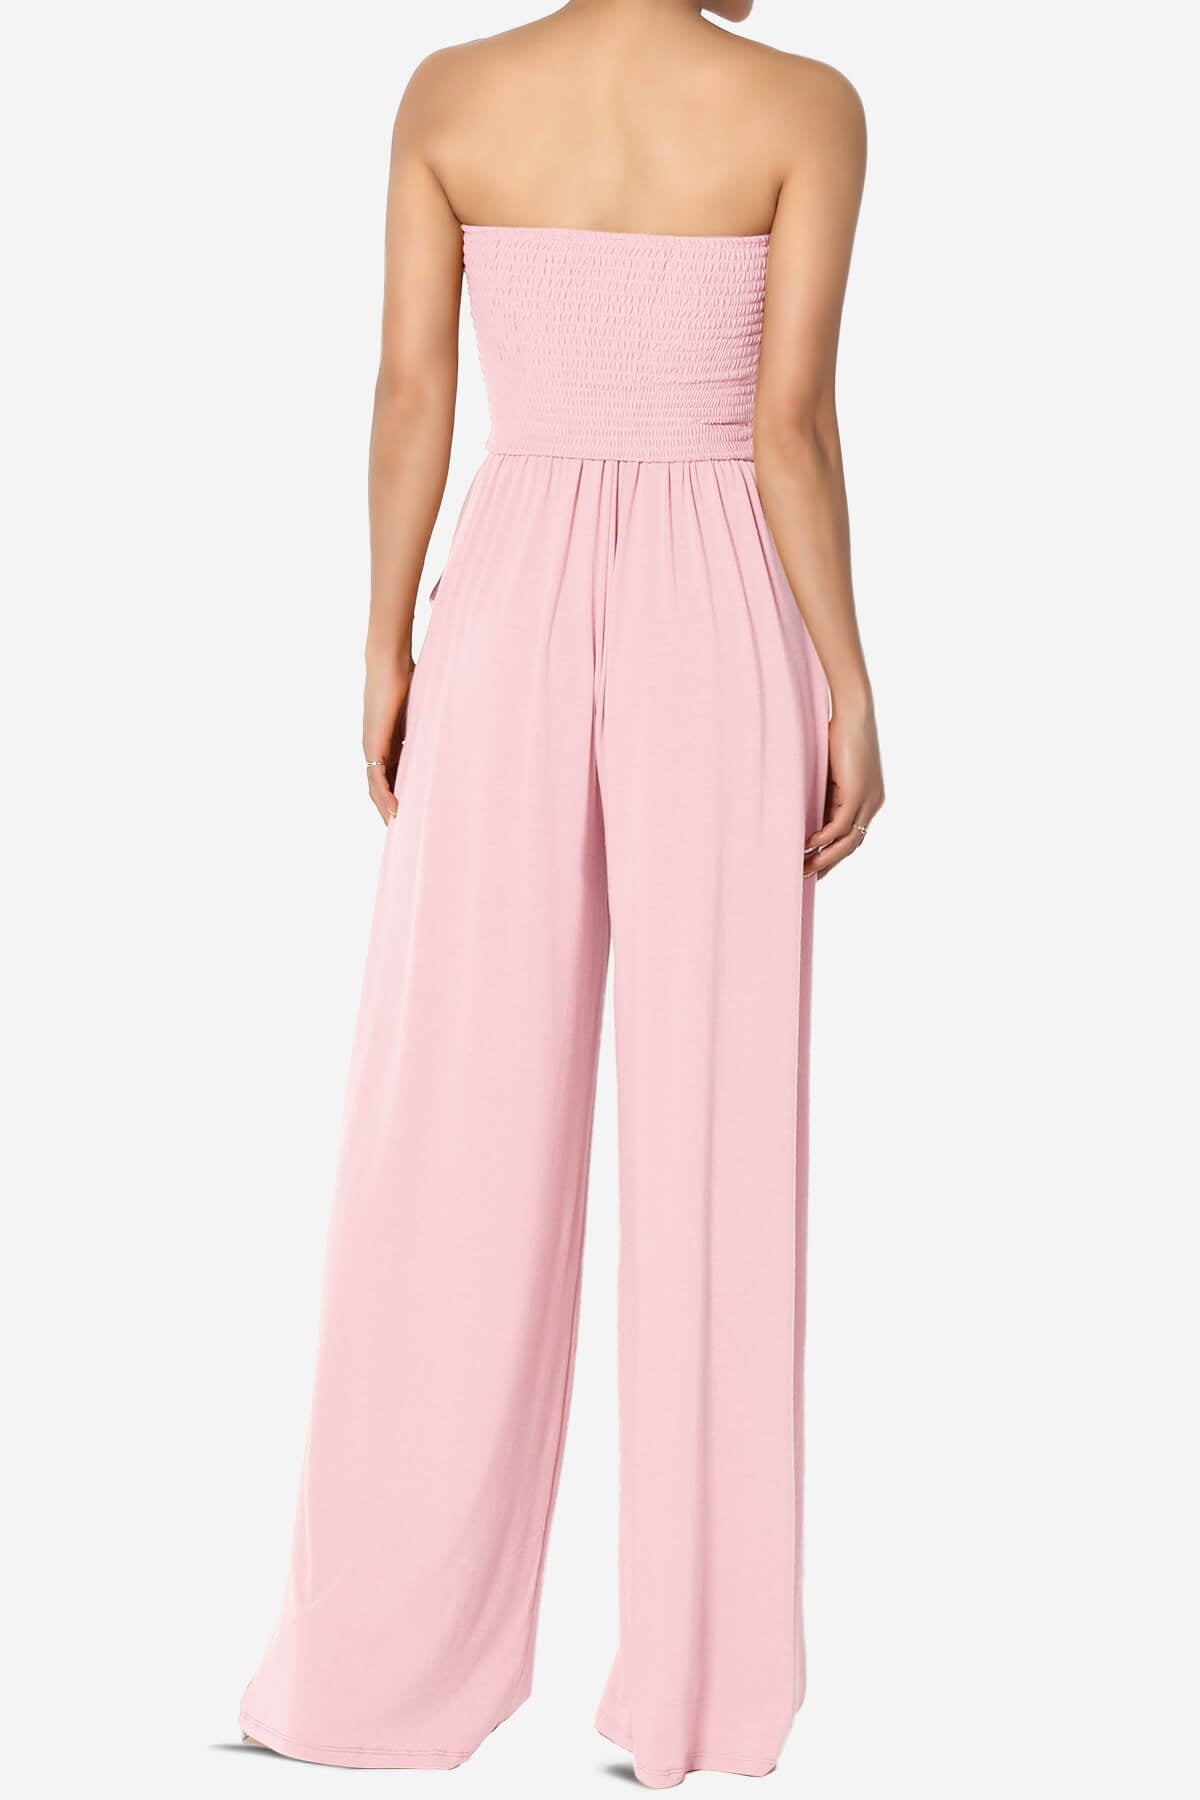 Jaklin Strapless Smocked Tube Top Jumpsuit DUSTY PINK_2